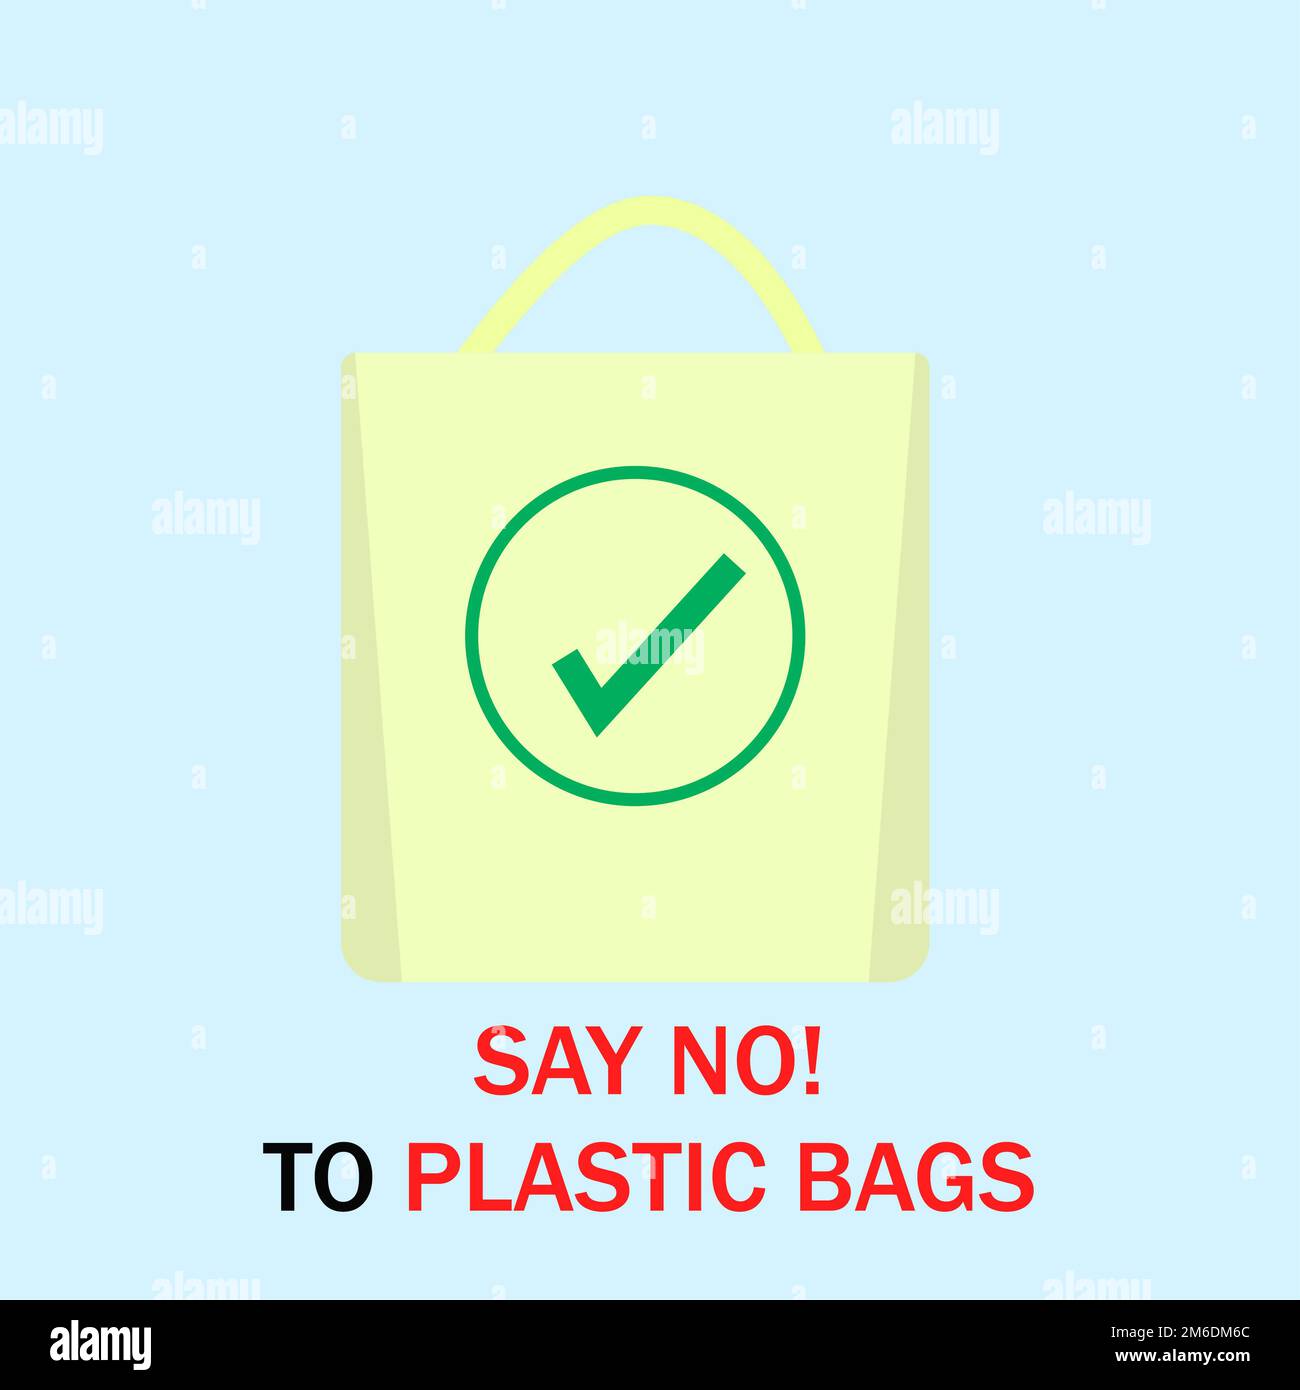 5 Biodegradable Alternatives to Plastic Bags